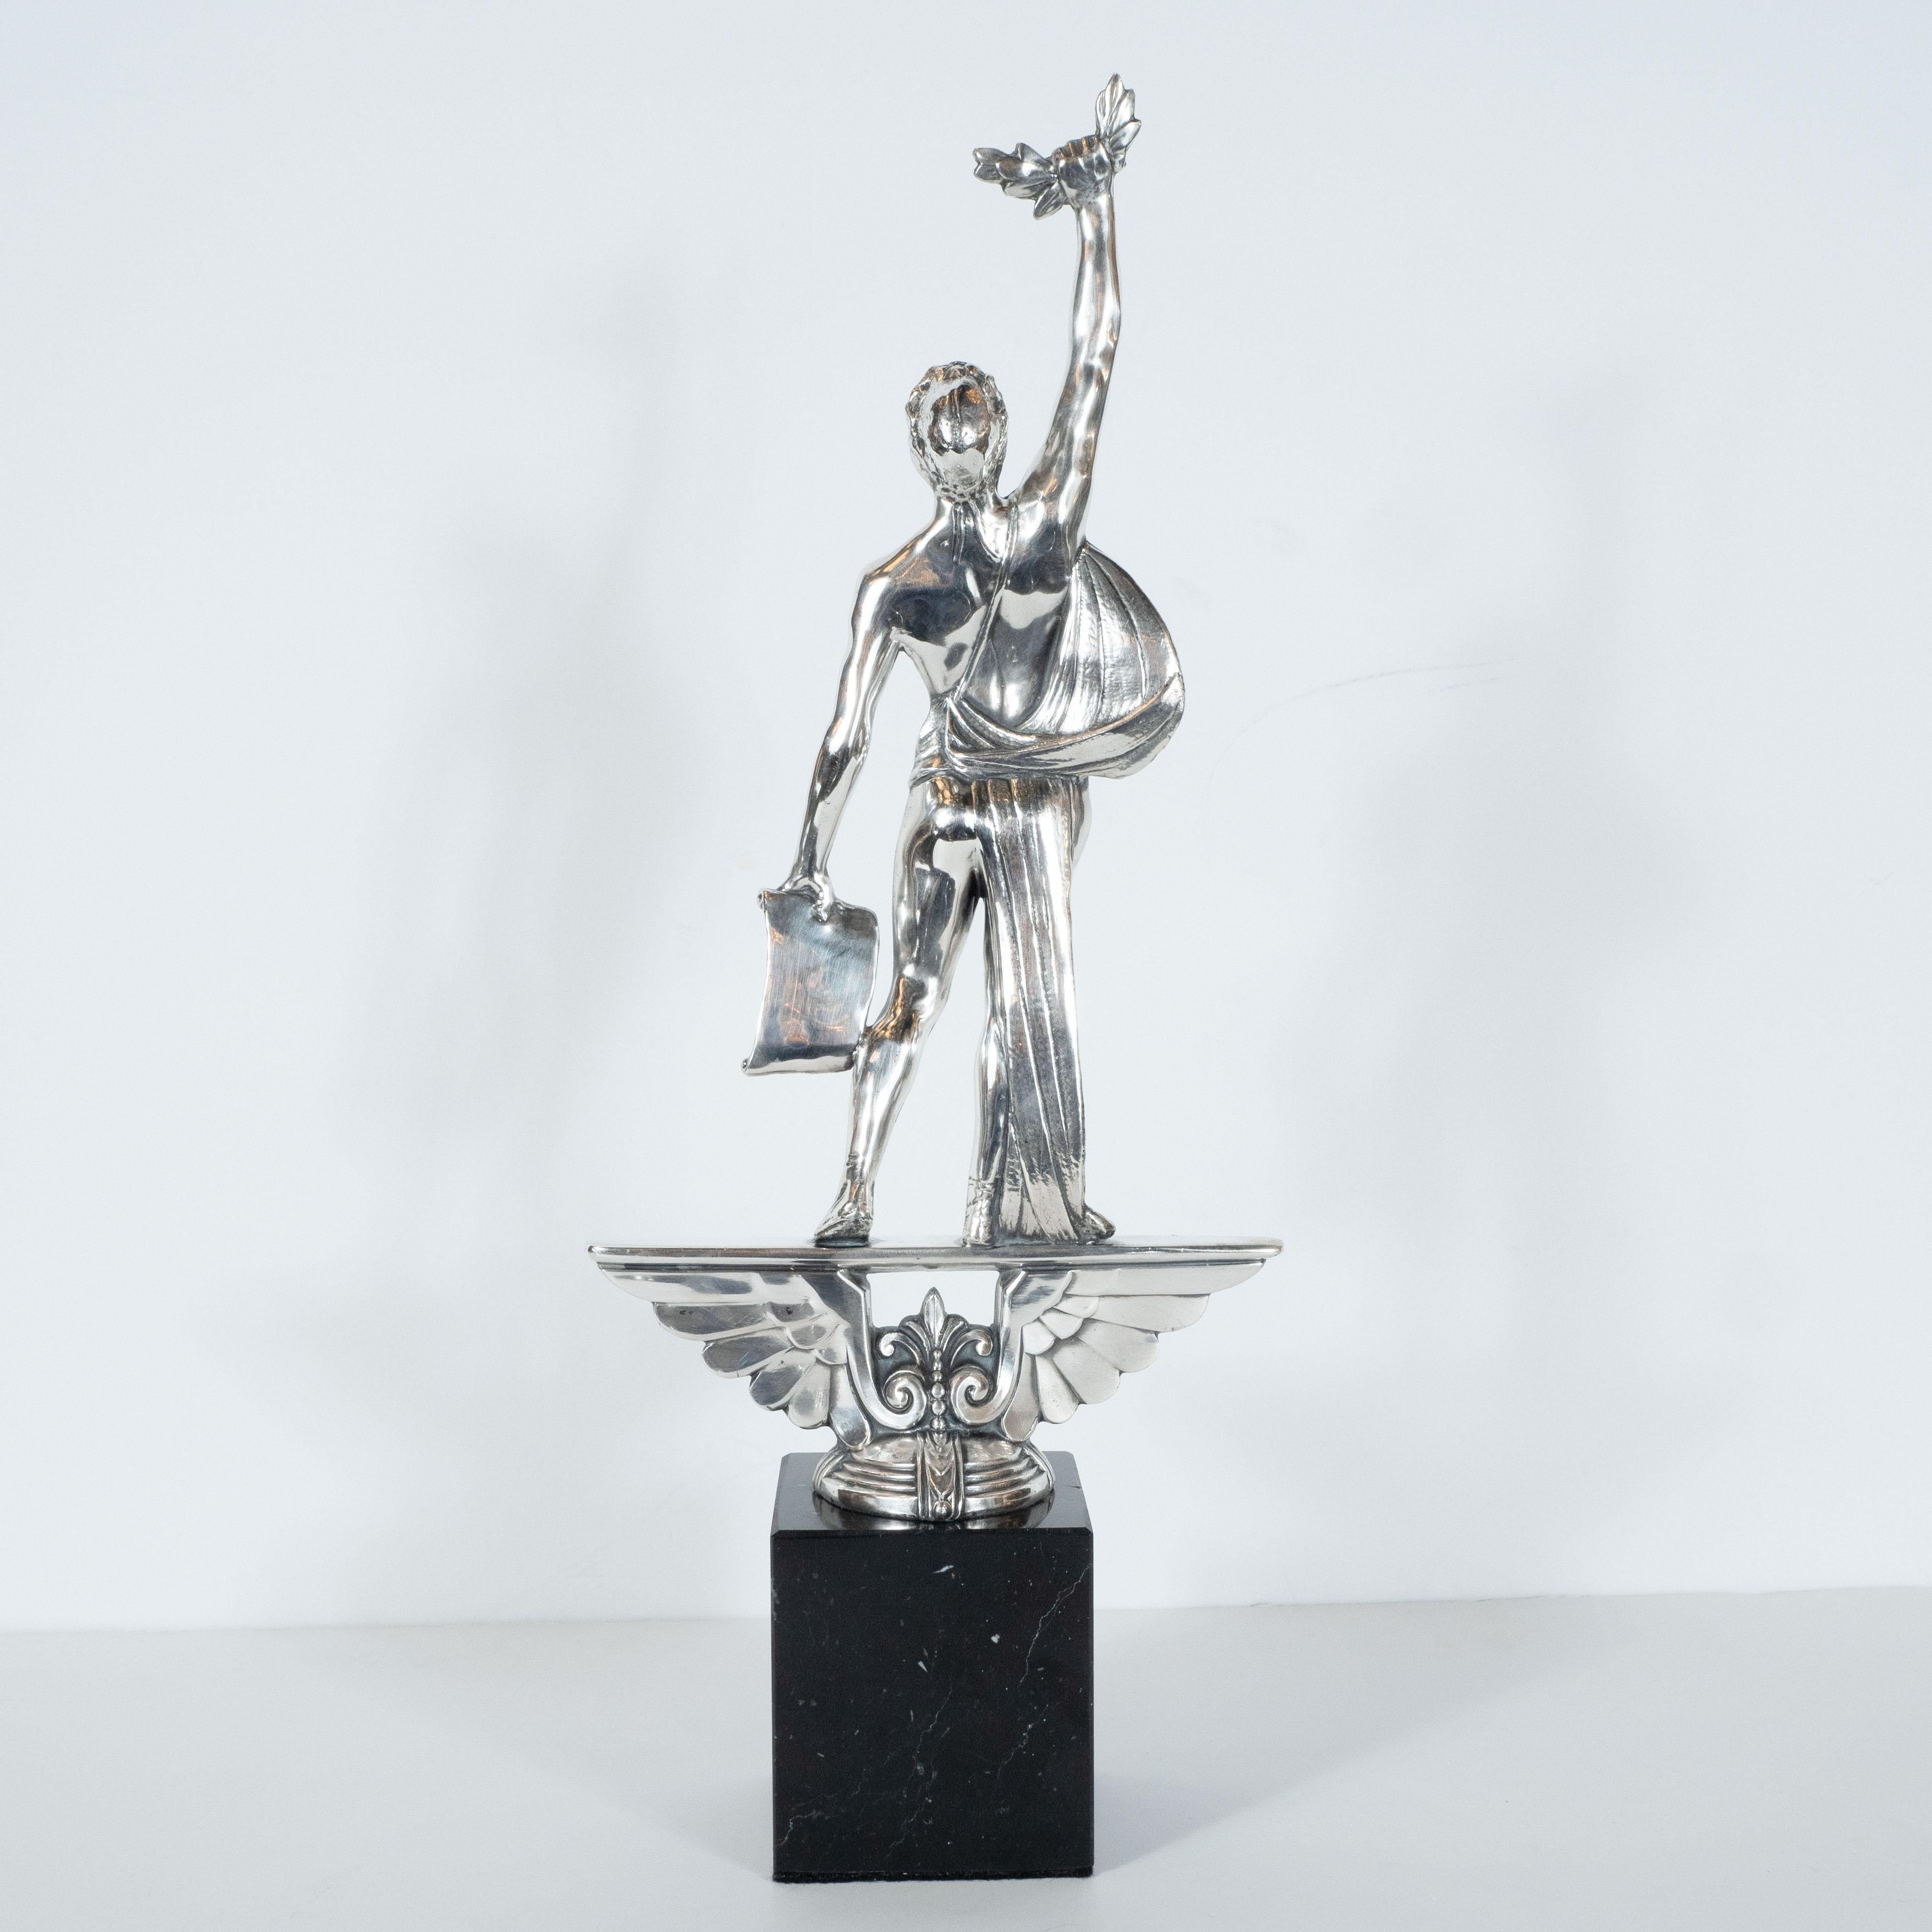 Art Deco Classical Figurative Silvered Sculpture with Wing and Acanthus Motifs 2